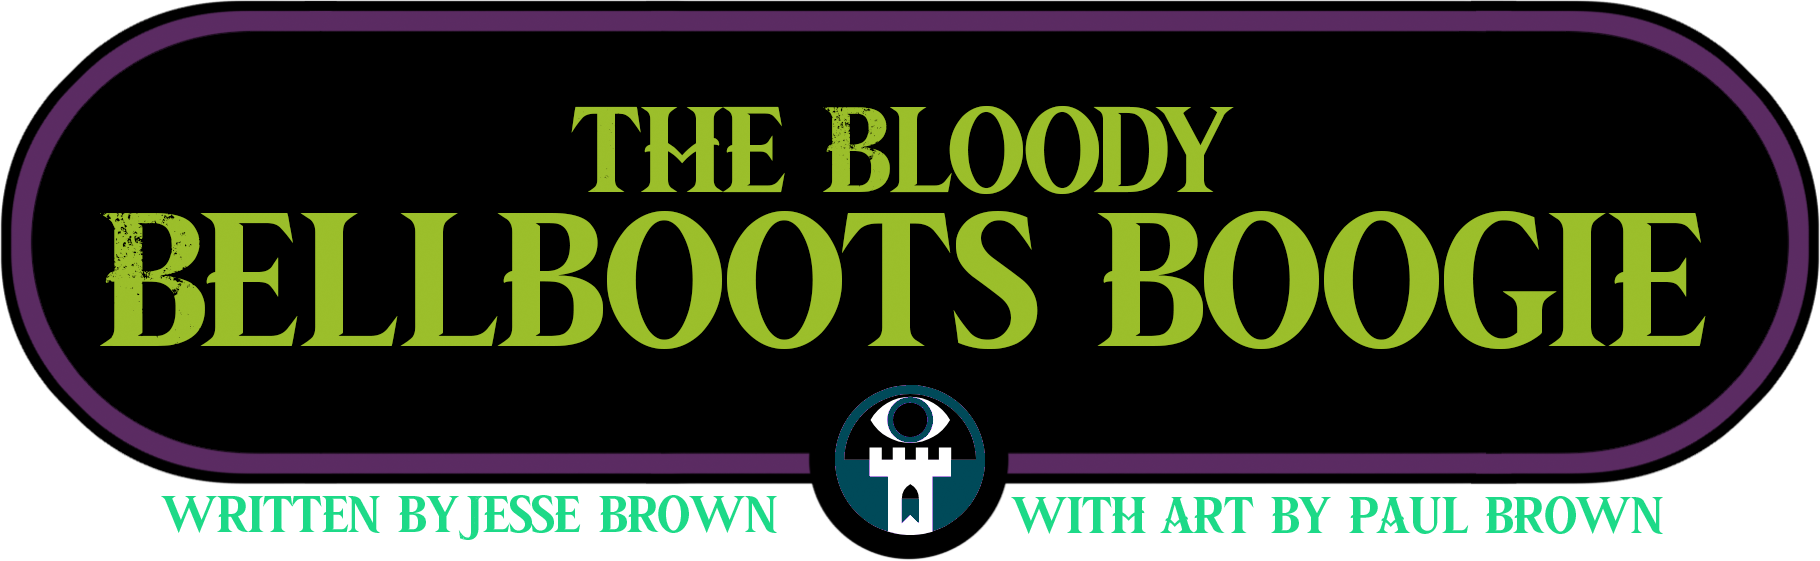 The Bloody Bellboots Boogie